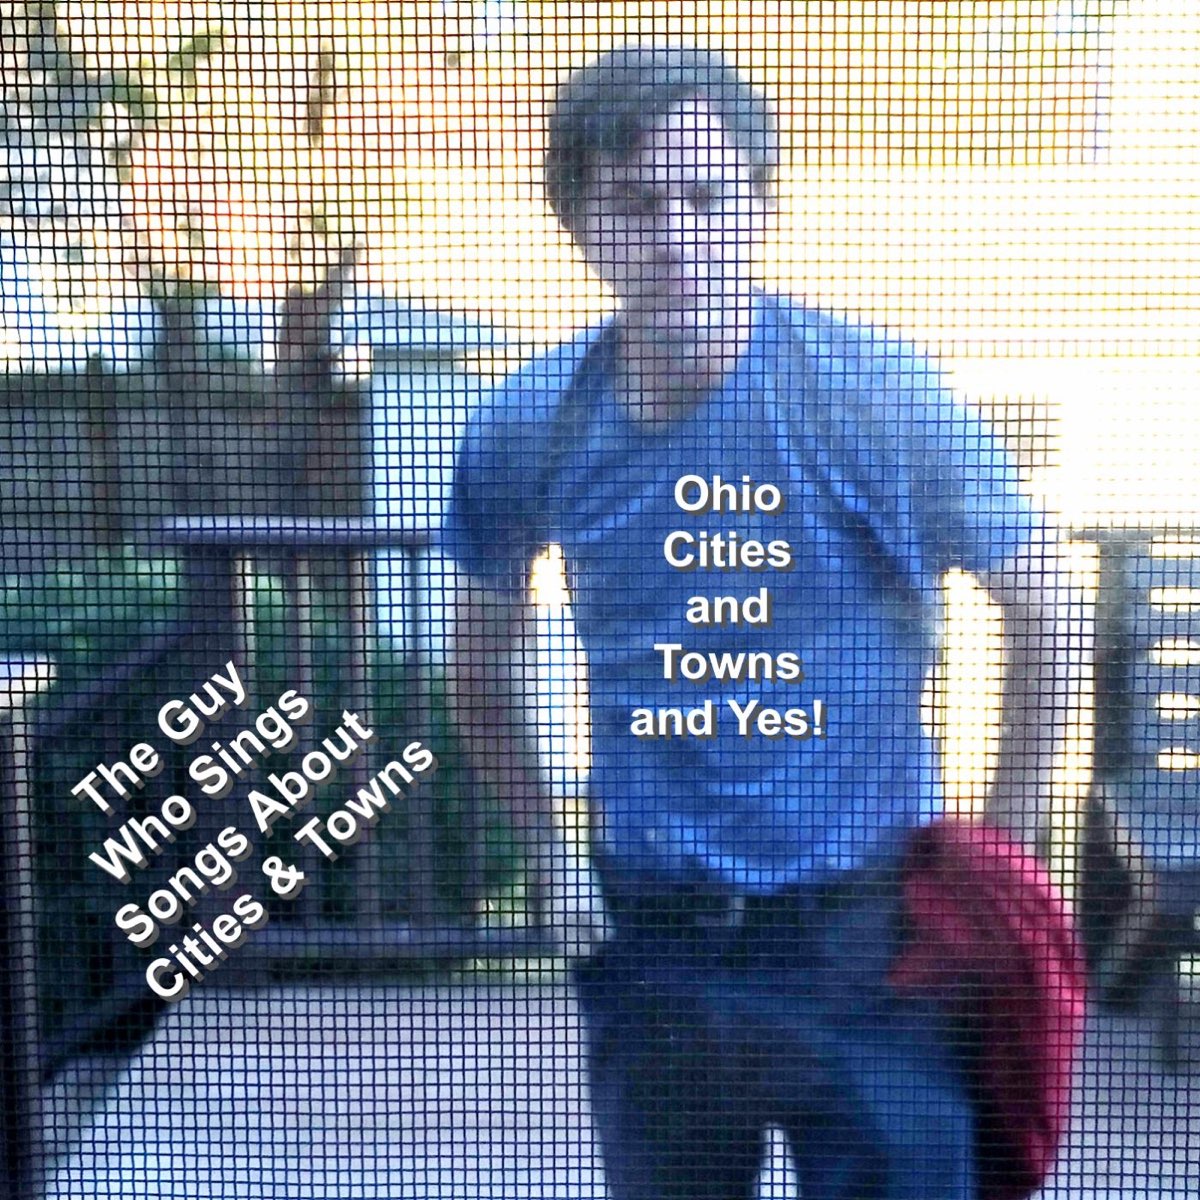 ‎Ohio Cities and Towns and Yes! by The Guy Who Sings Songs About Cities